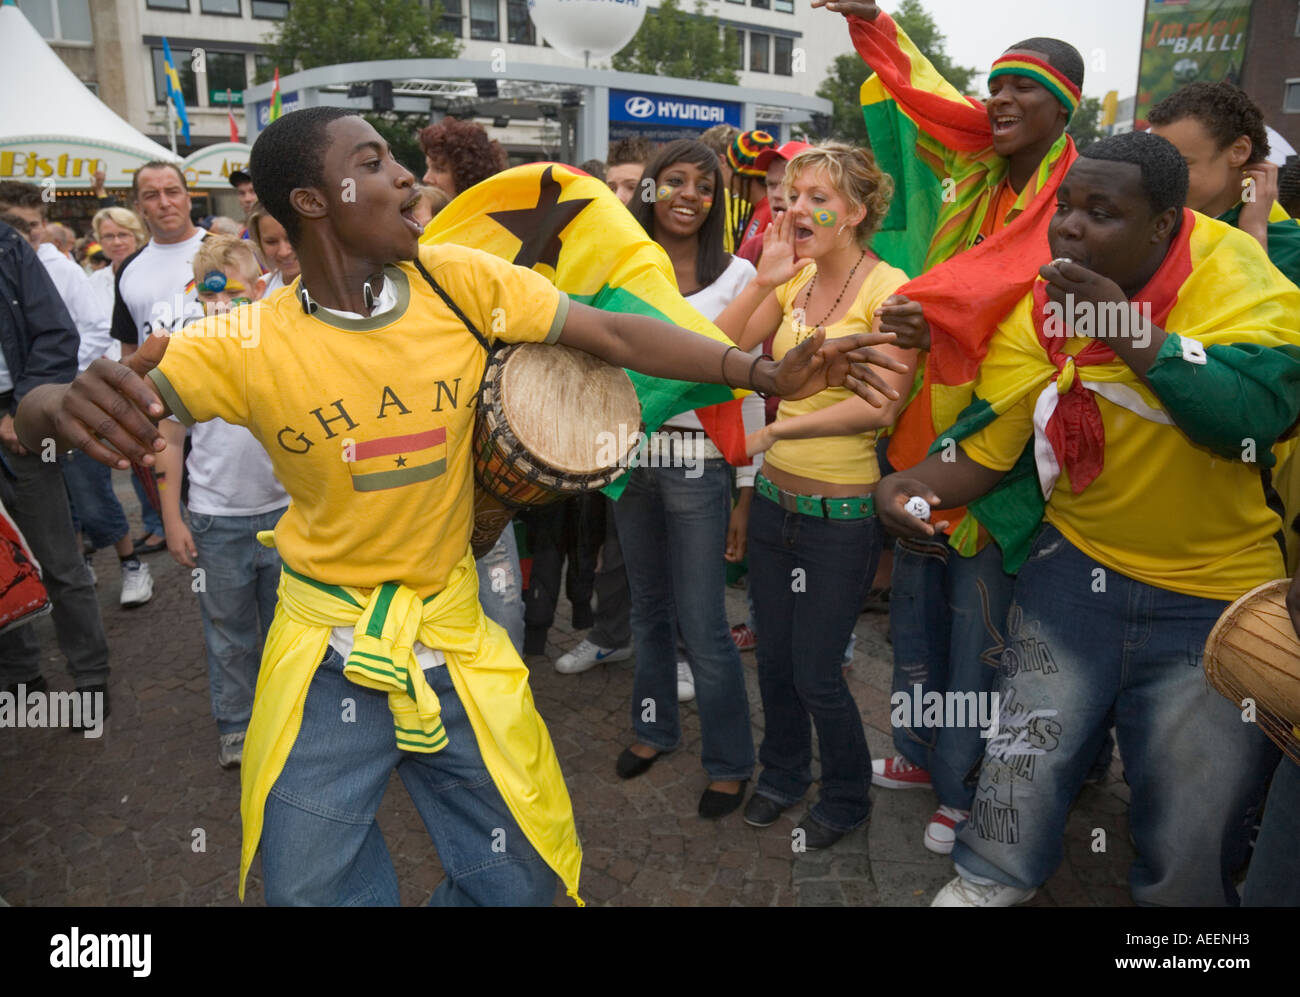 Black and white Ghanaian football fans making music at a public viewing event before the world cup match Brazil vs. Ghana Stock Photo